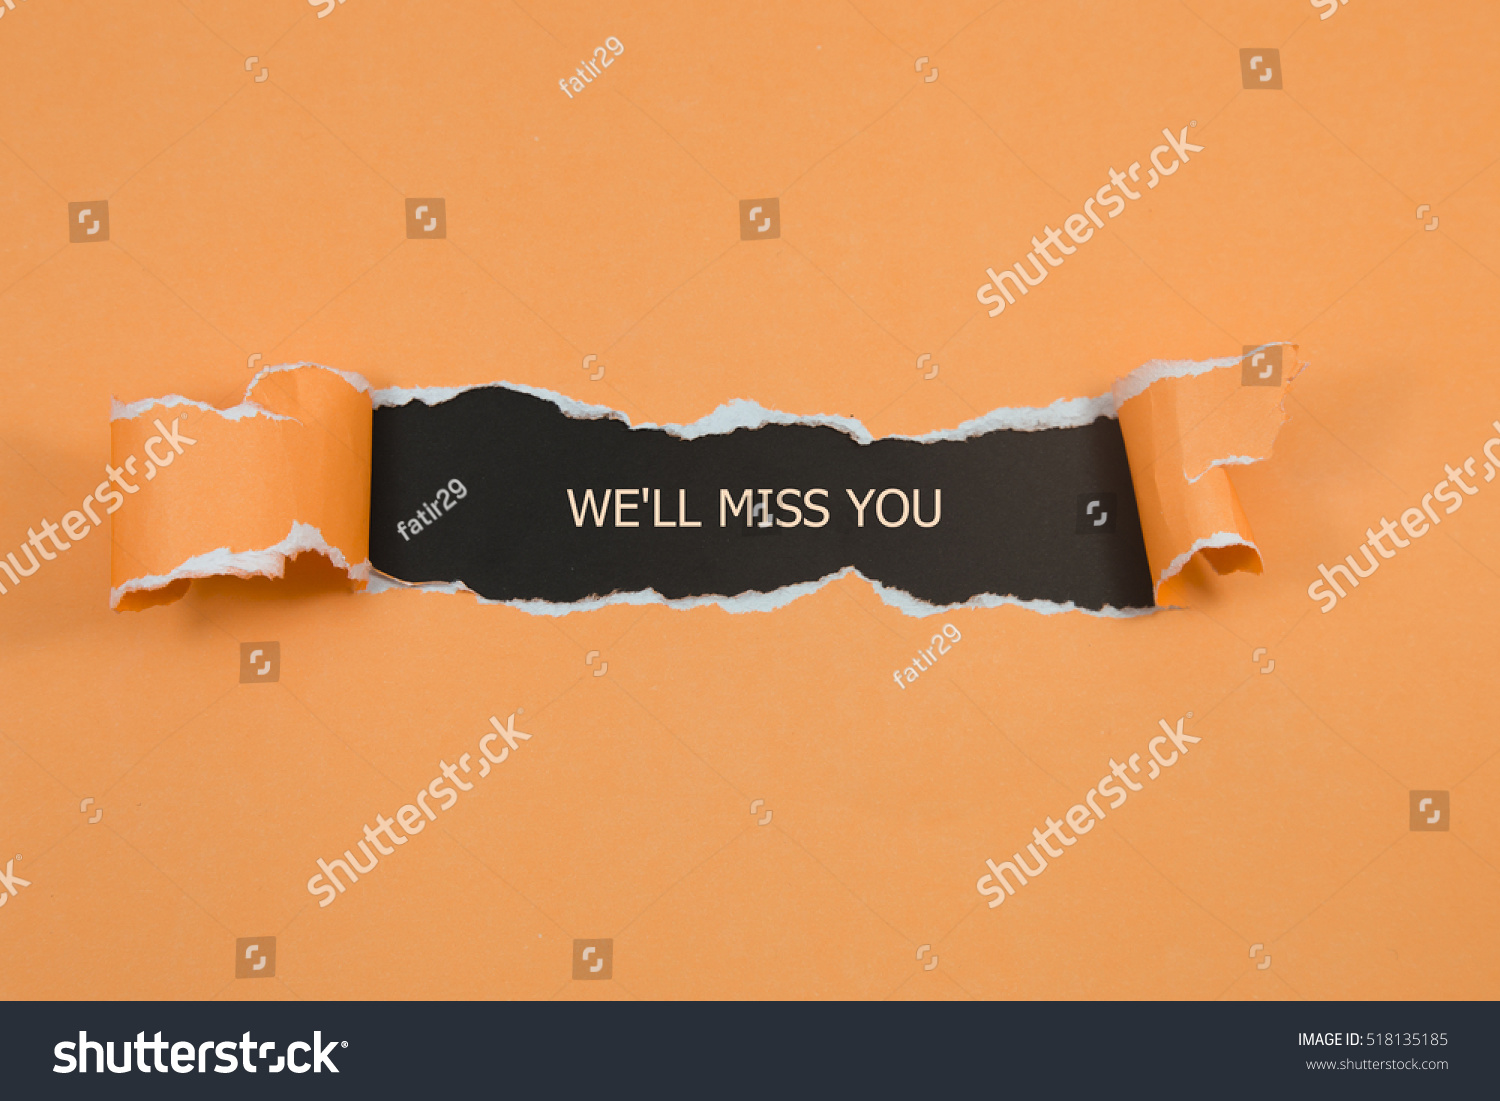 The text We'll Miss You appearing behind torn brown paper #518135185